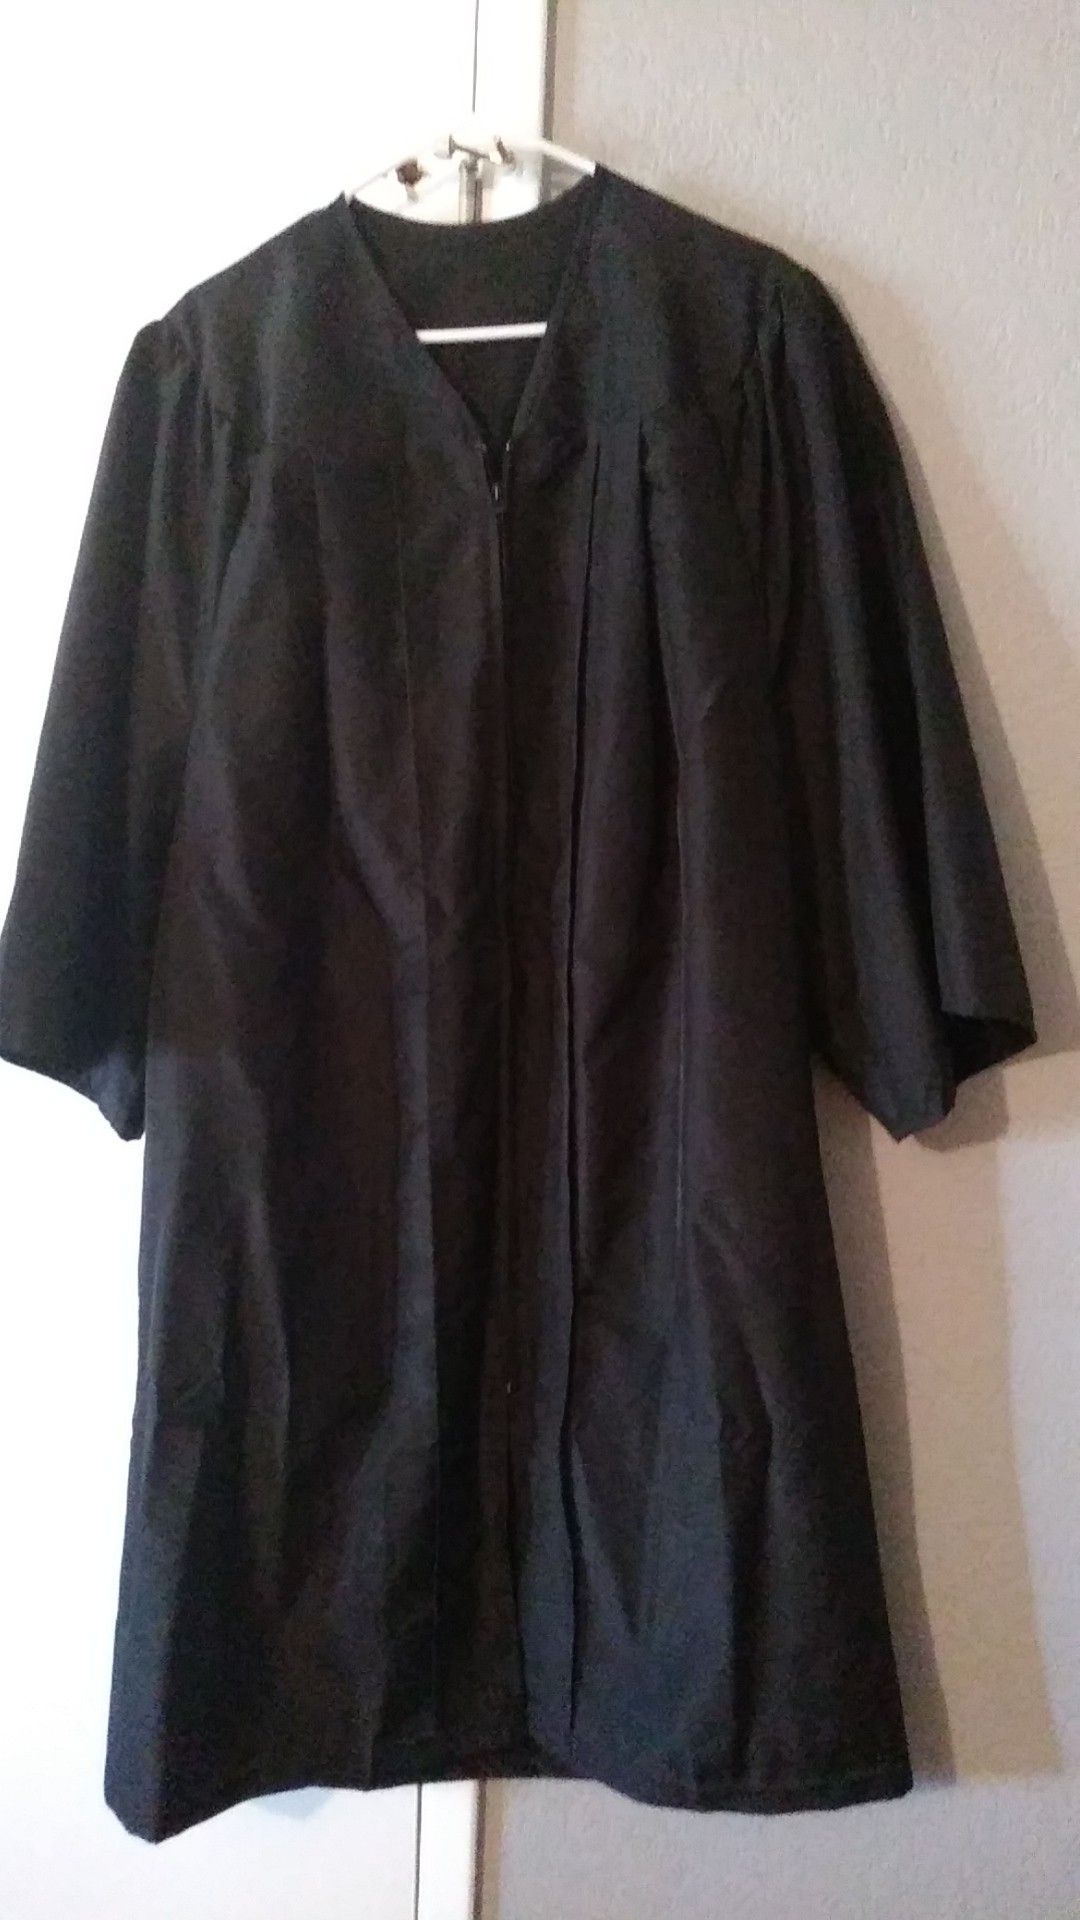 Cap and gown for graduation